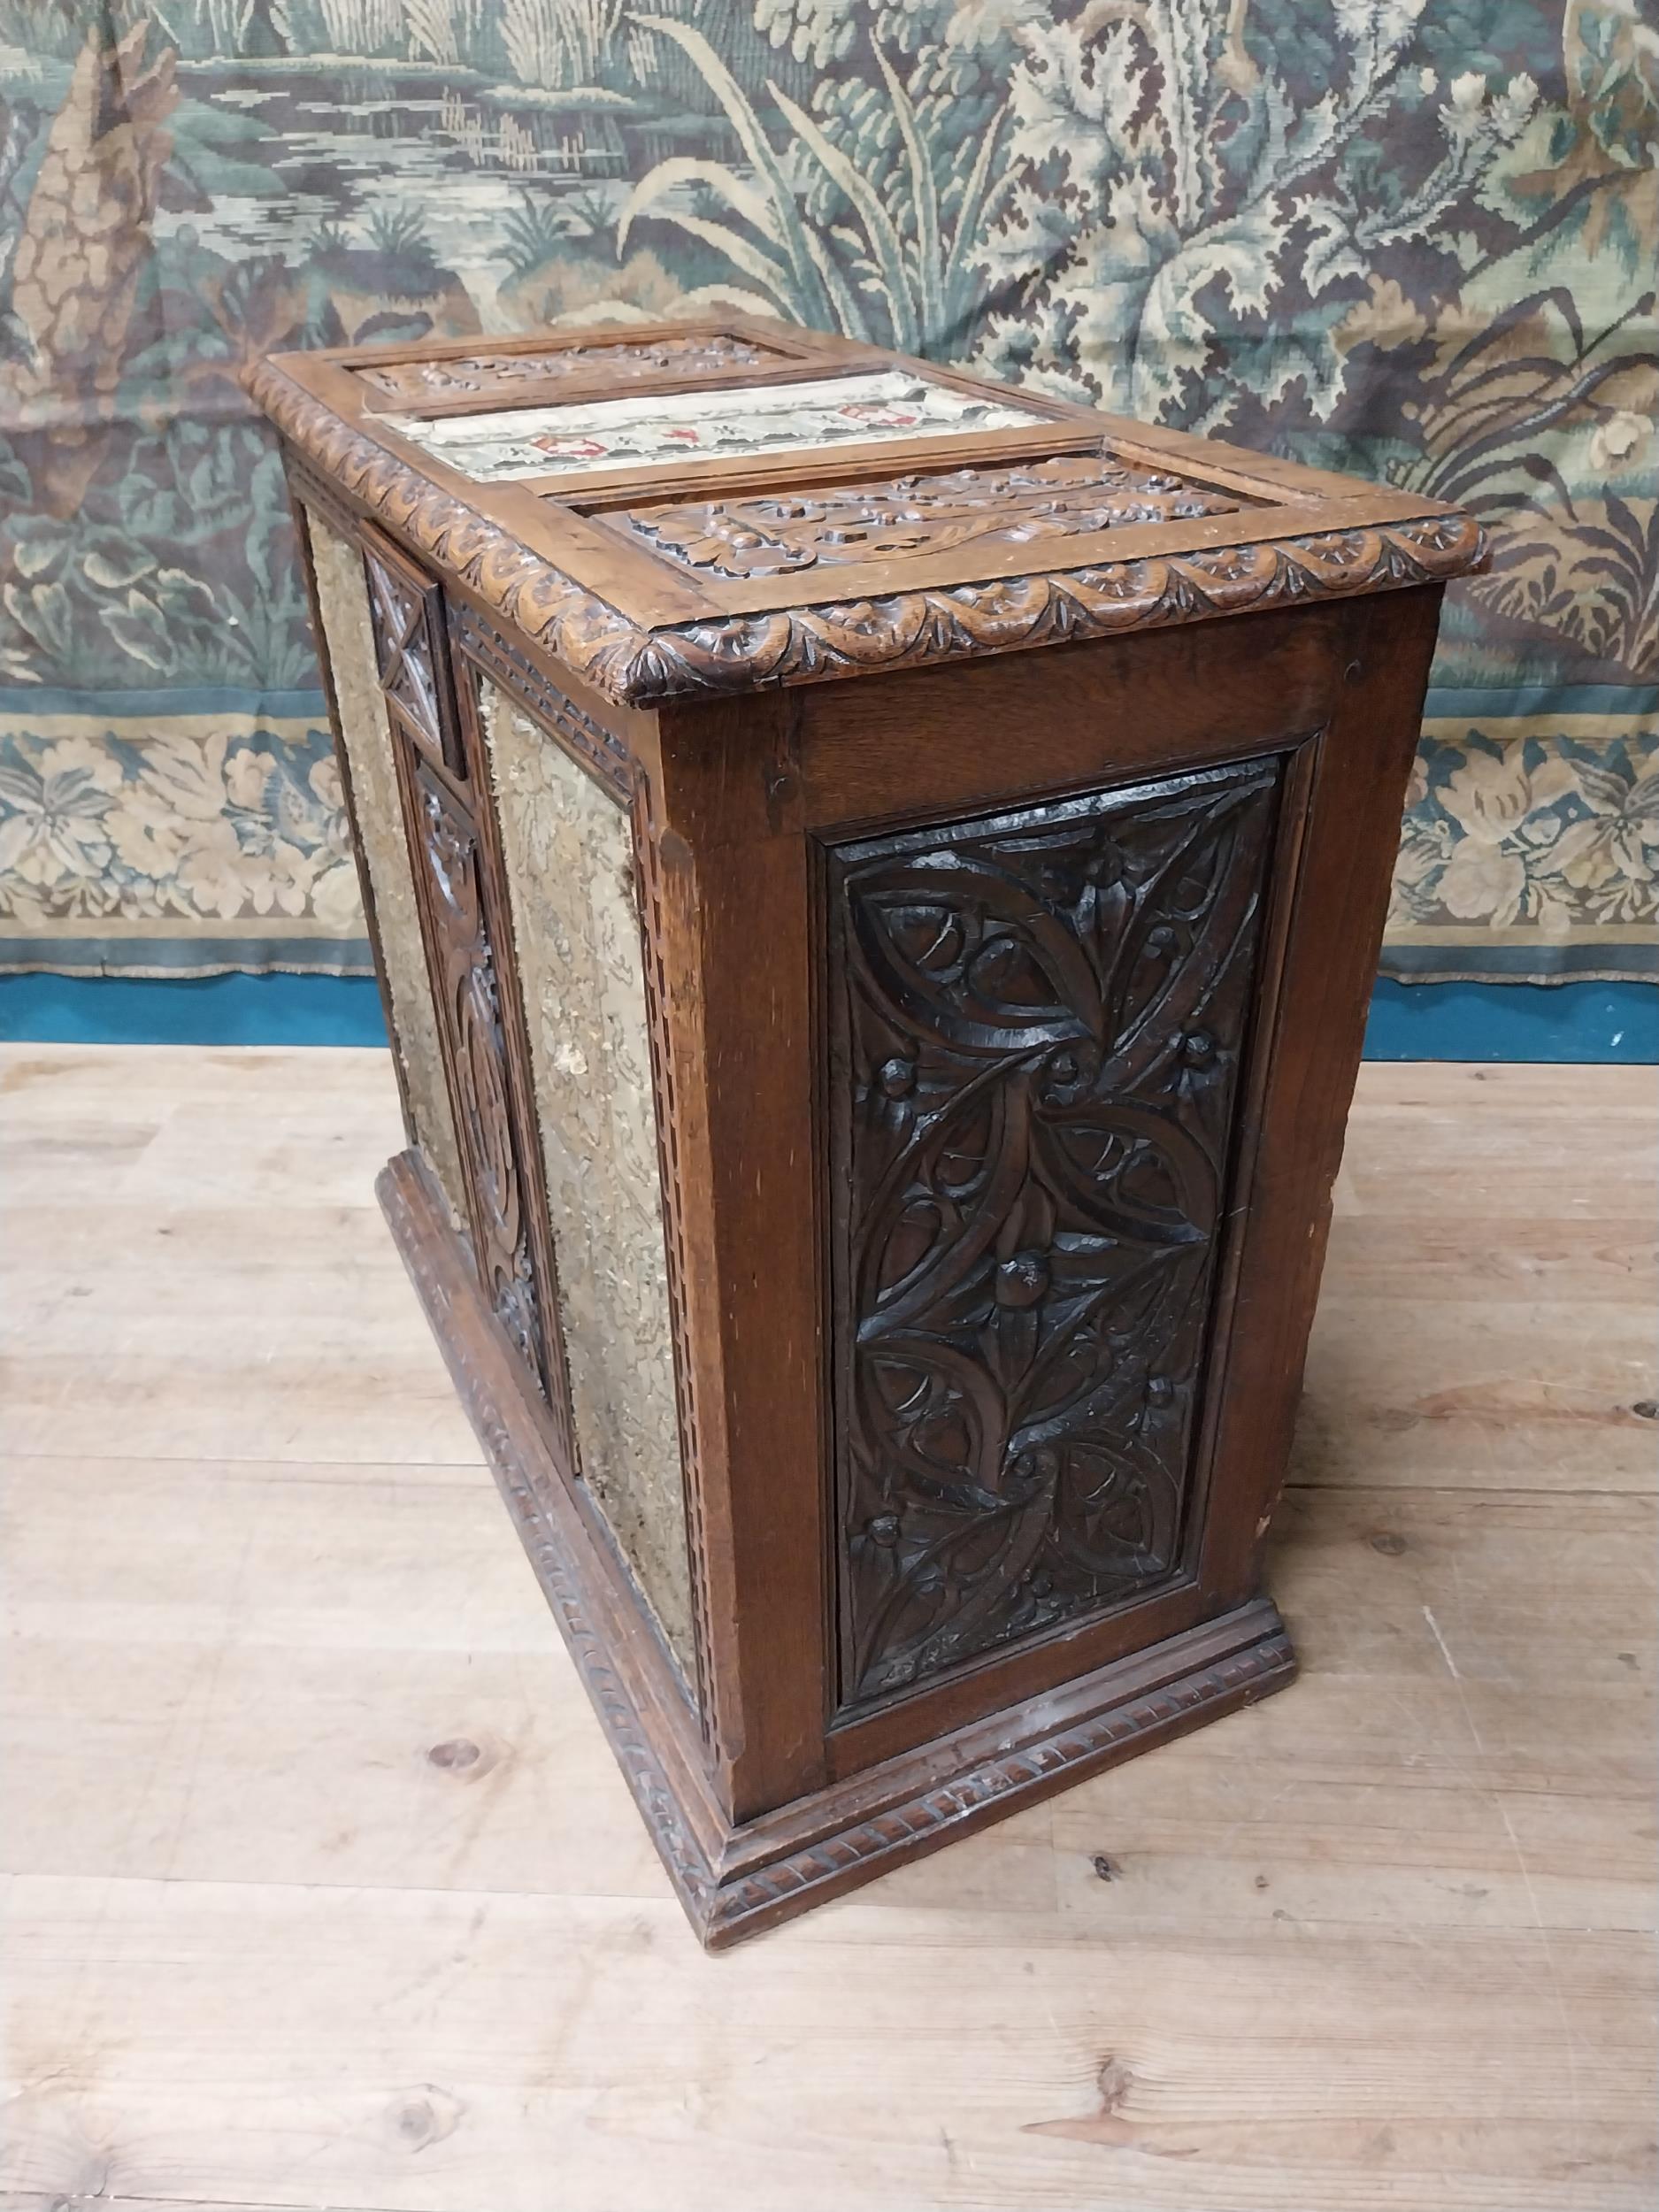 19th C. carved oak blanket box with tapestry panels {75 cm H x 85 cm W x 44 cm D}. - Image 7 of 8